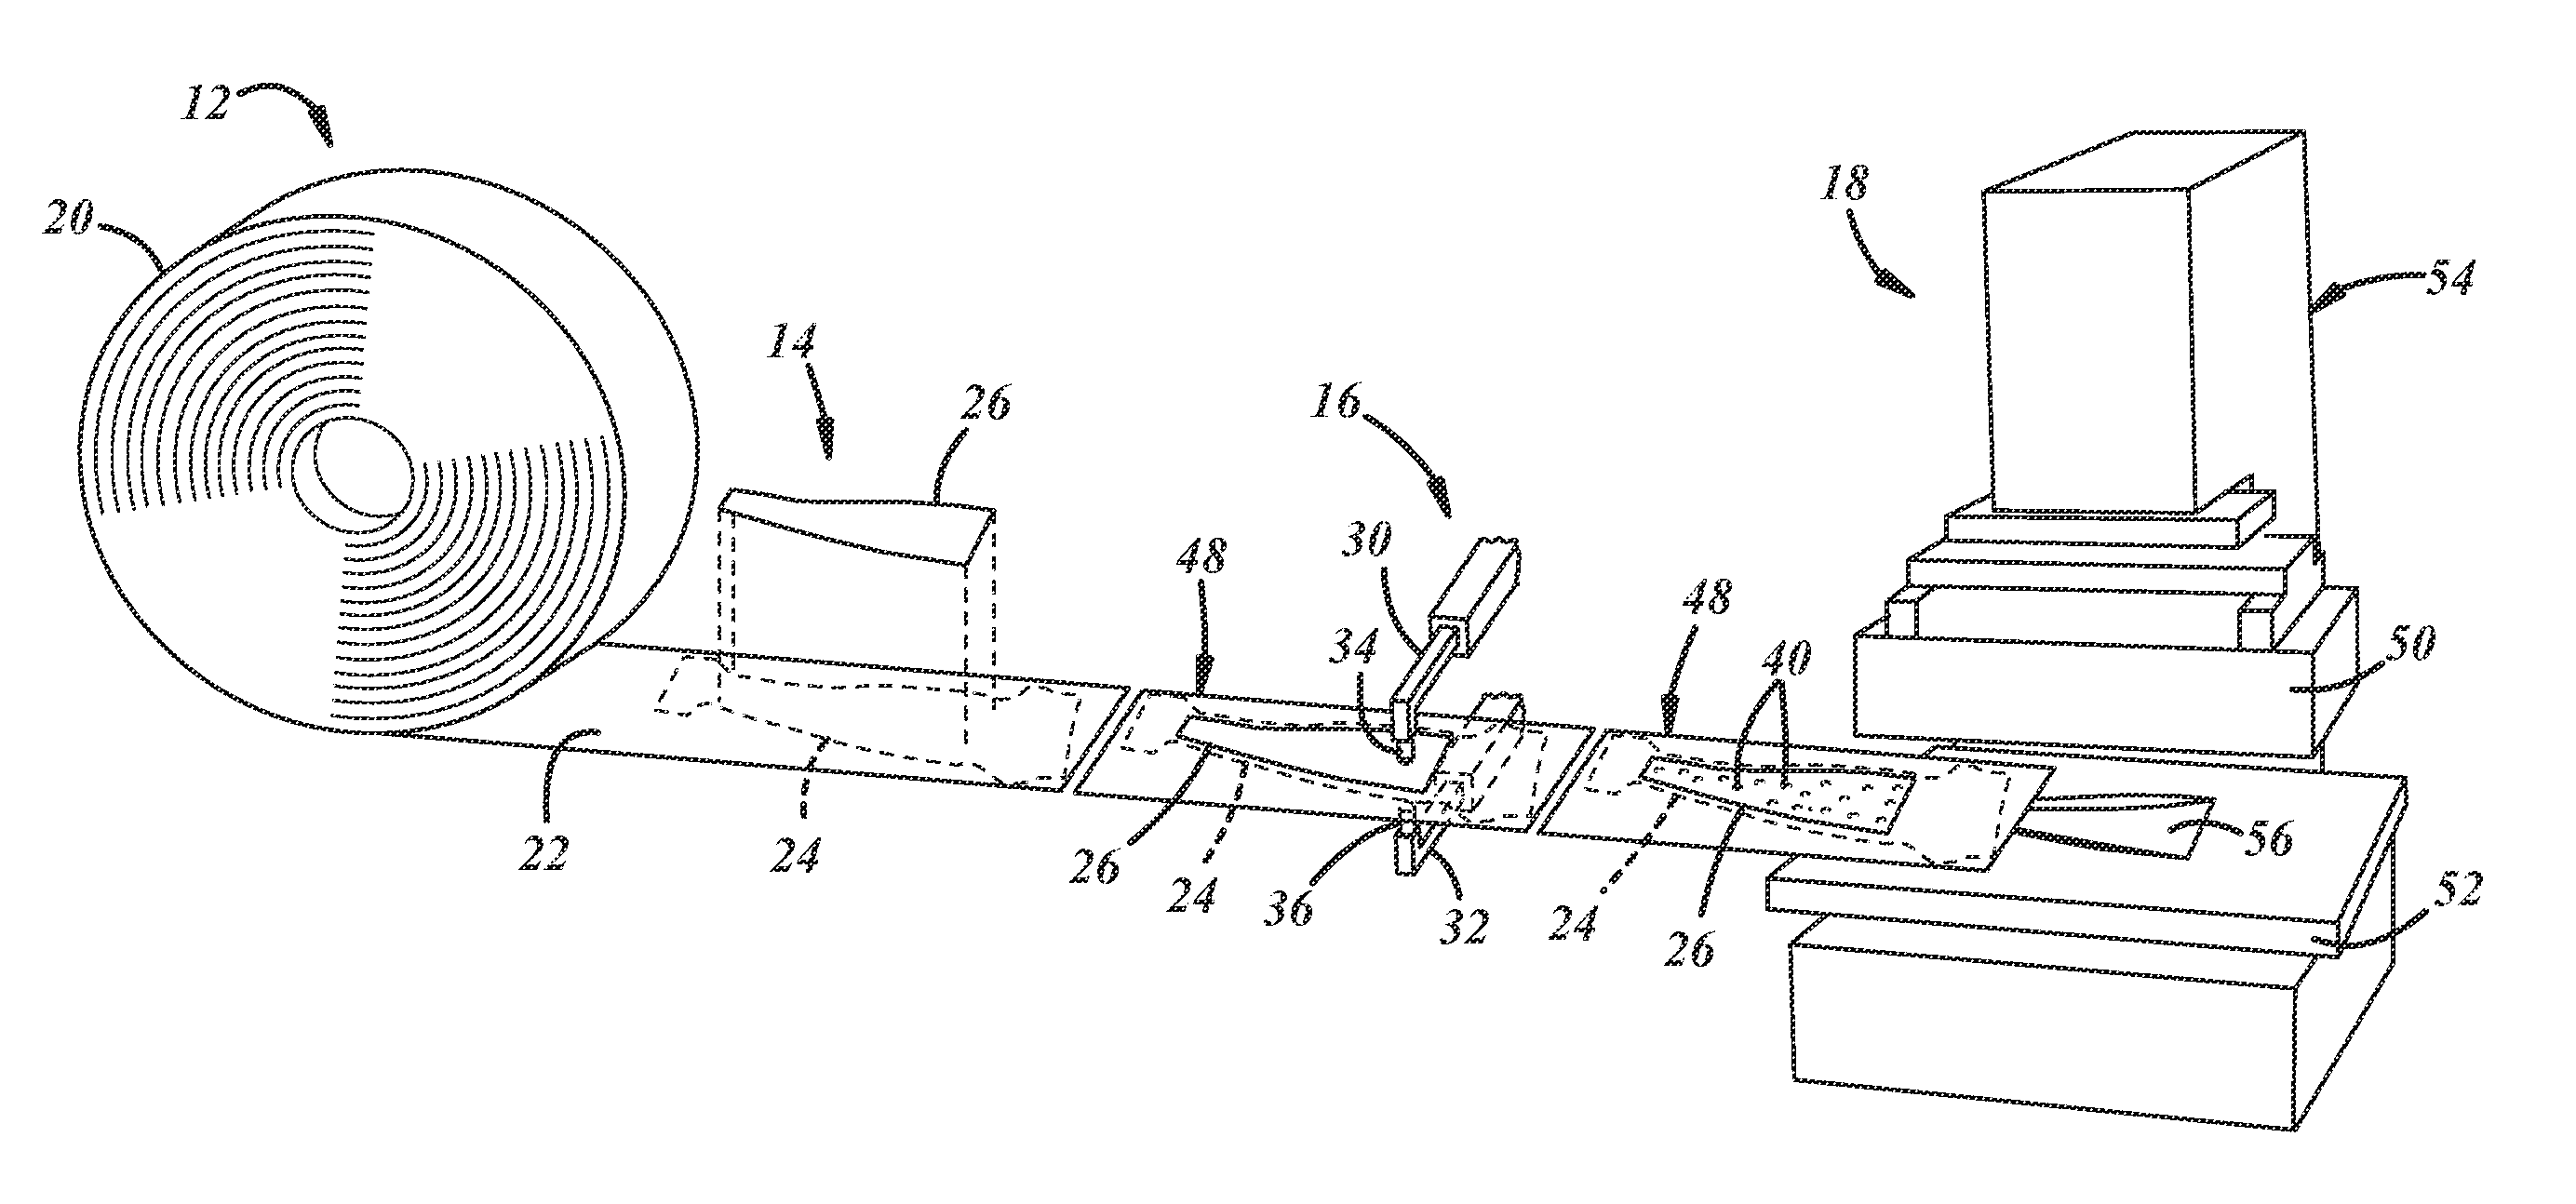 Method of forming a vehicle body structure from a pre-welded blank assembly